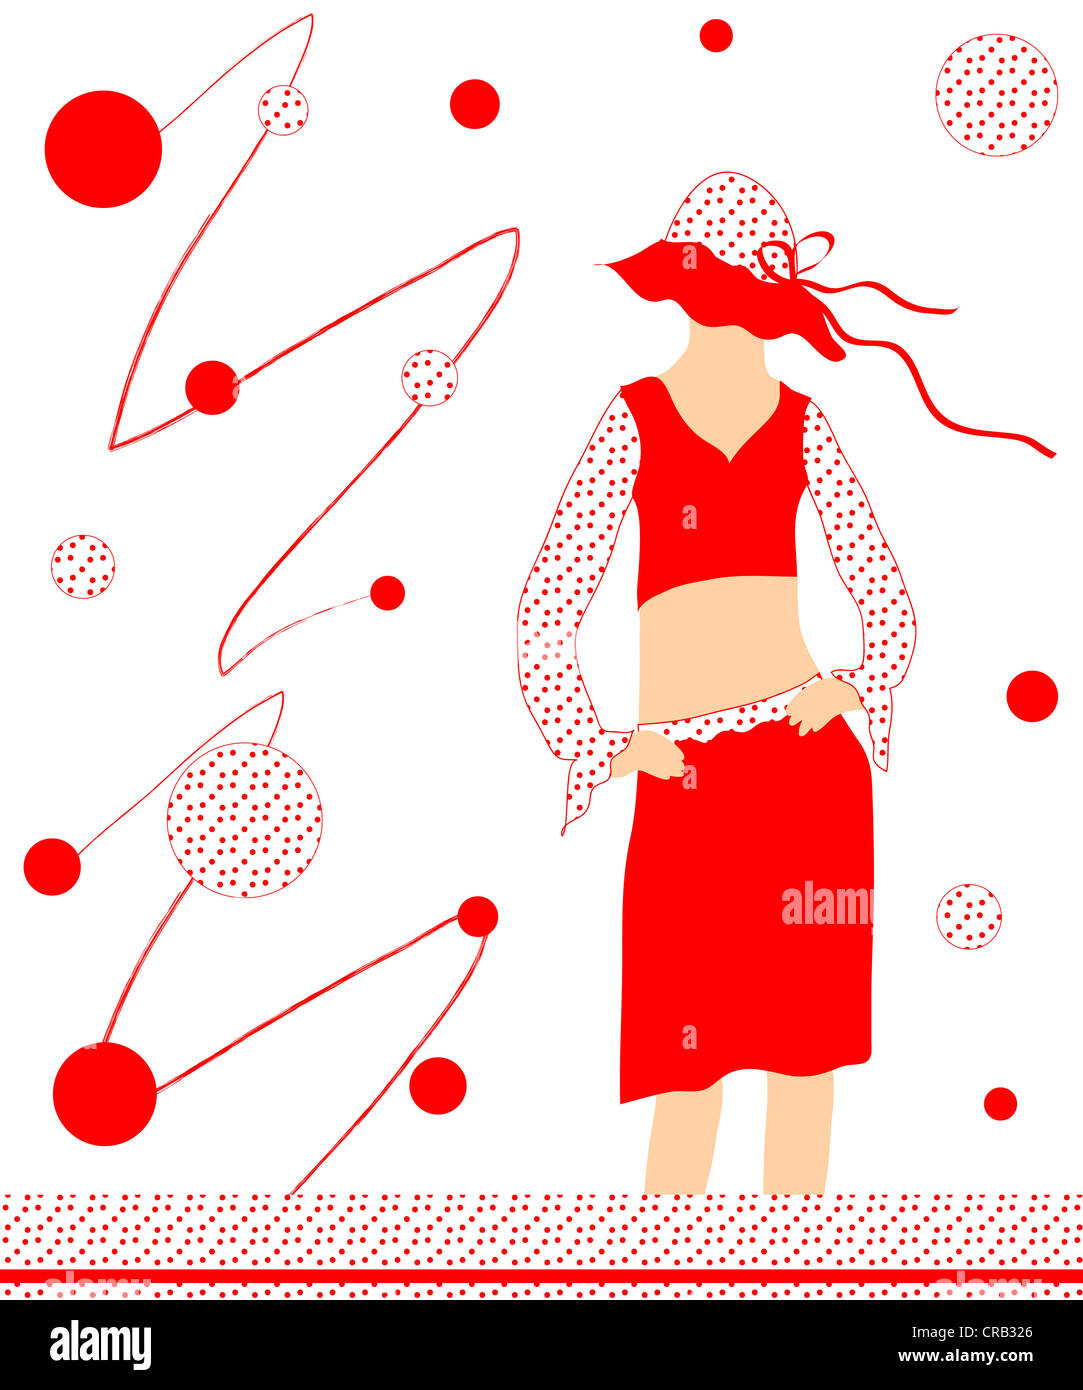 Female fashion in red dress illustration Stock Photo